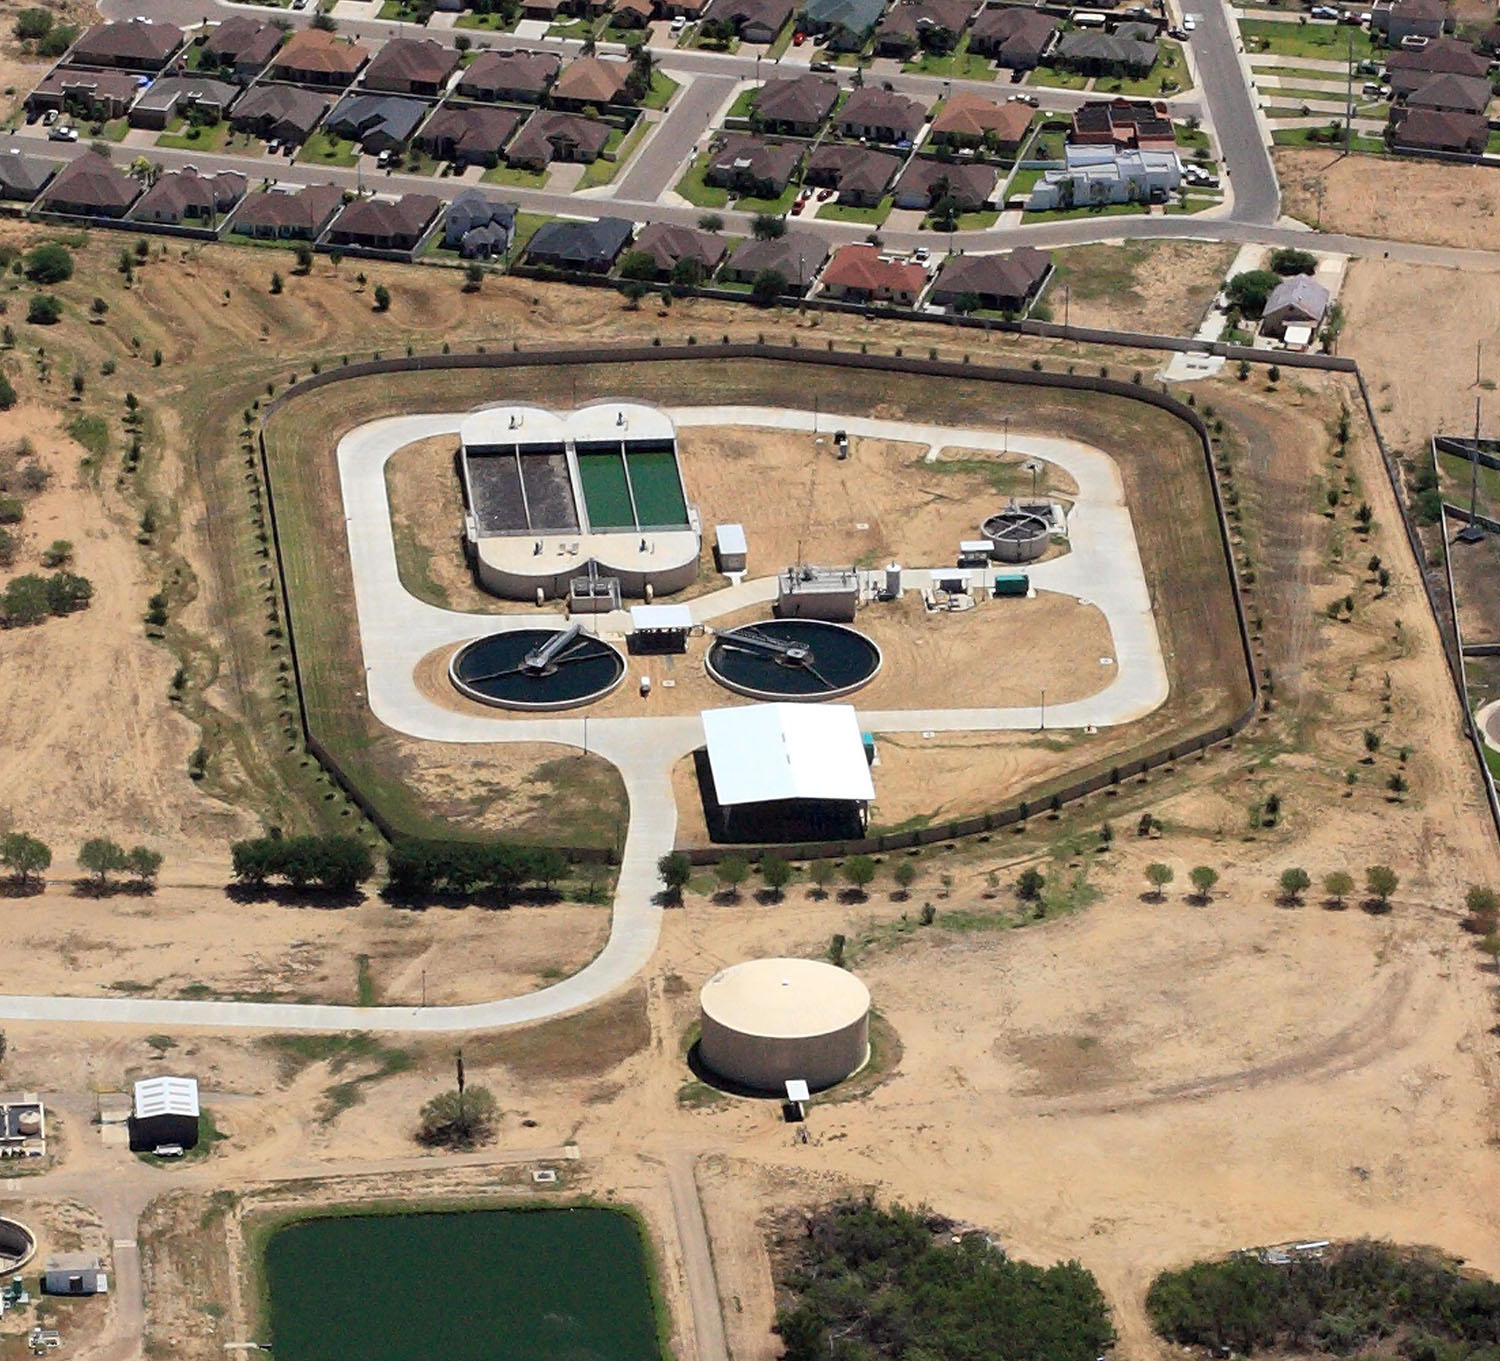 North Wastewater Treatment Plant